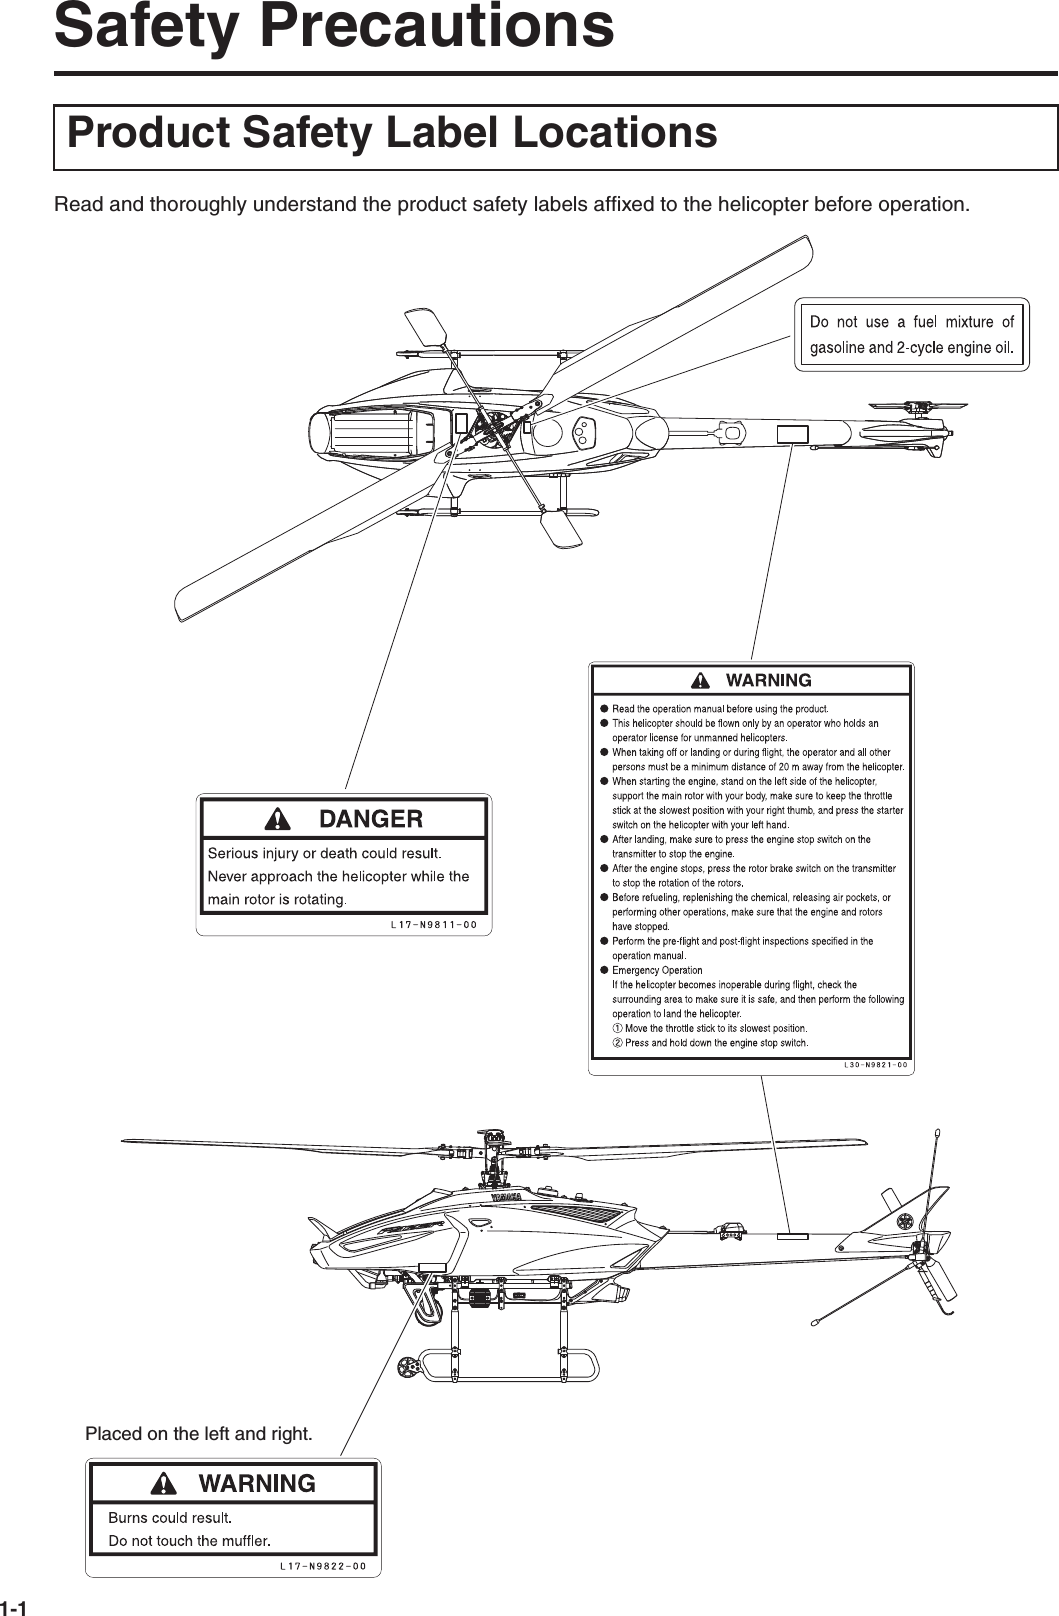 1-1Safety PrecautionsRead and thoroughly understand the product safety labels affixed to the helicopter before operation.Product Safety Label LocationsPlaced on the left and right.